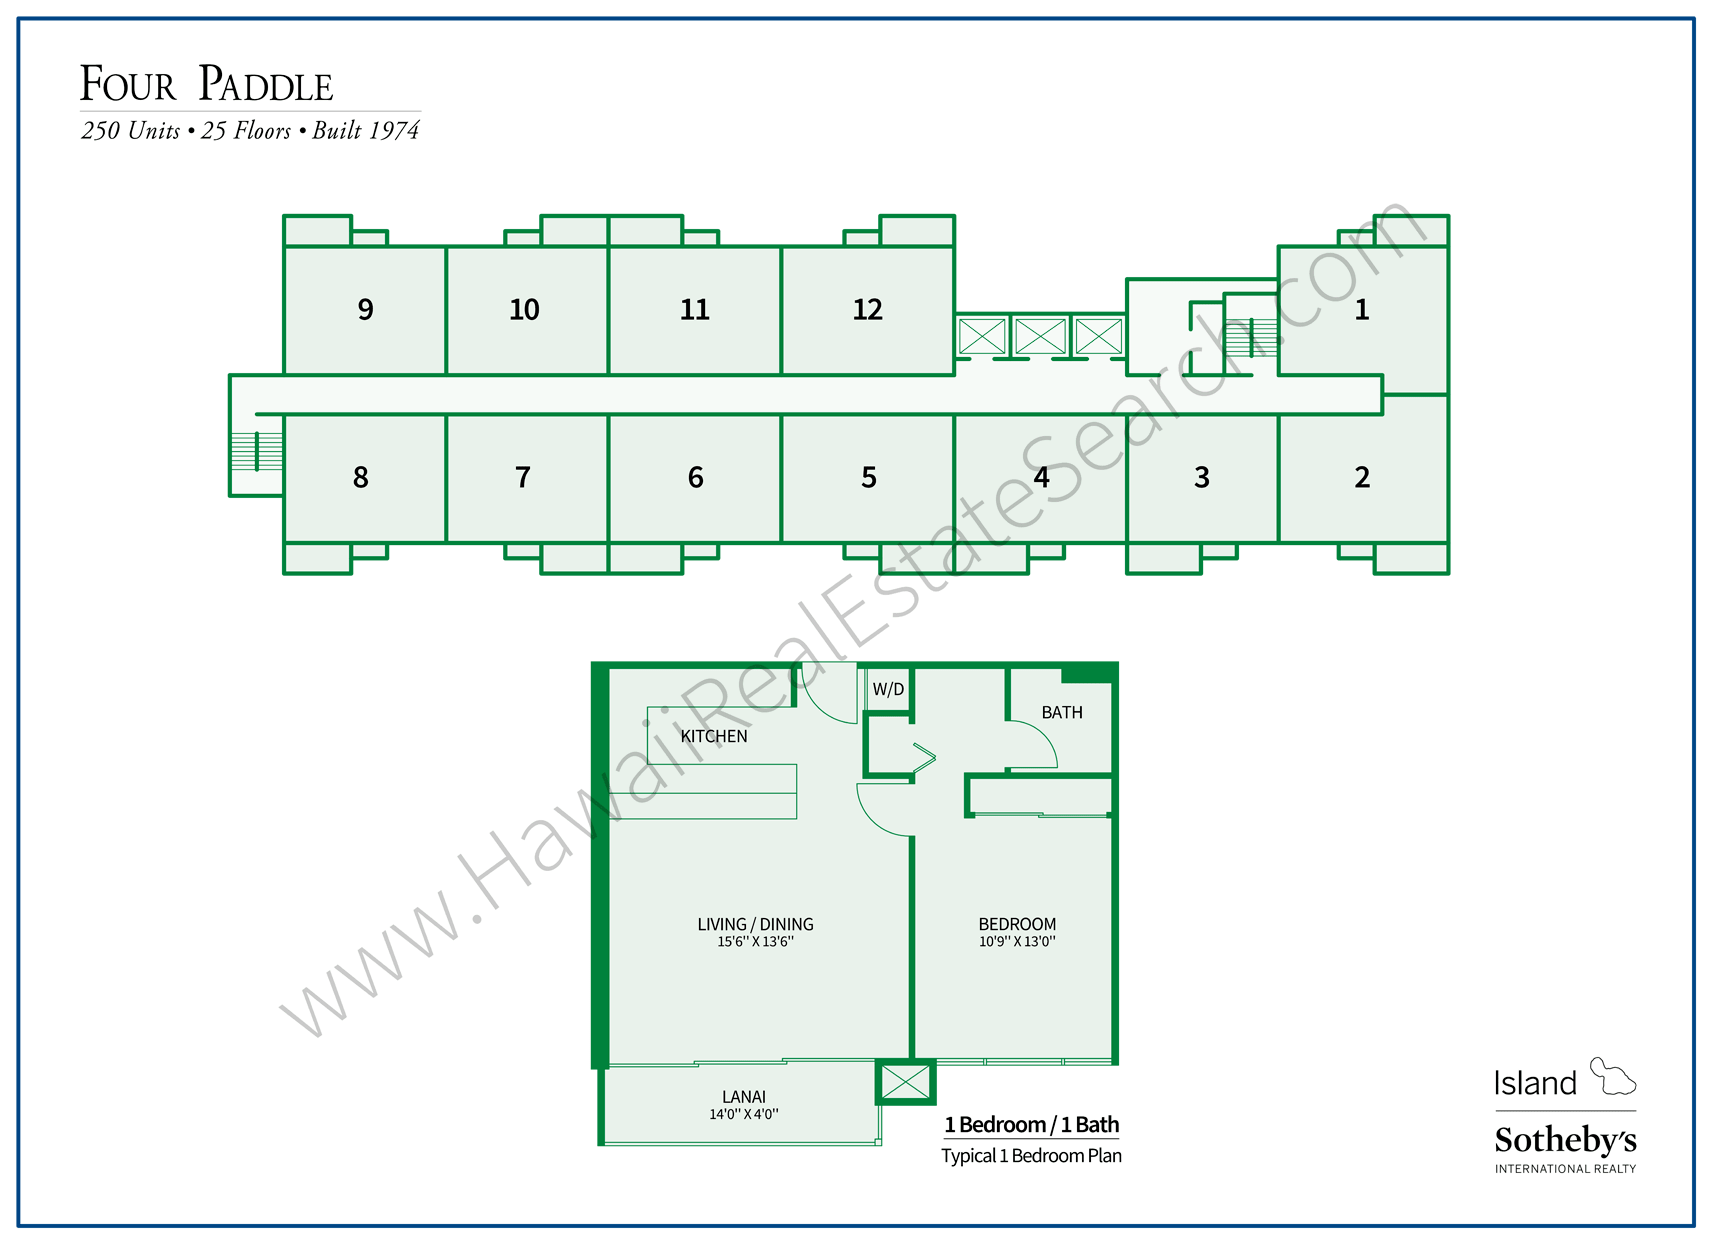 Four Paddle Property Map and Floor Plan